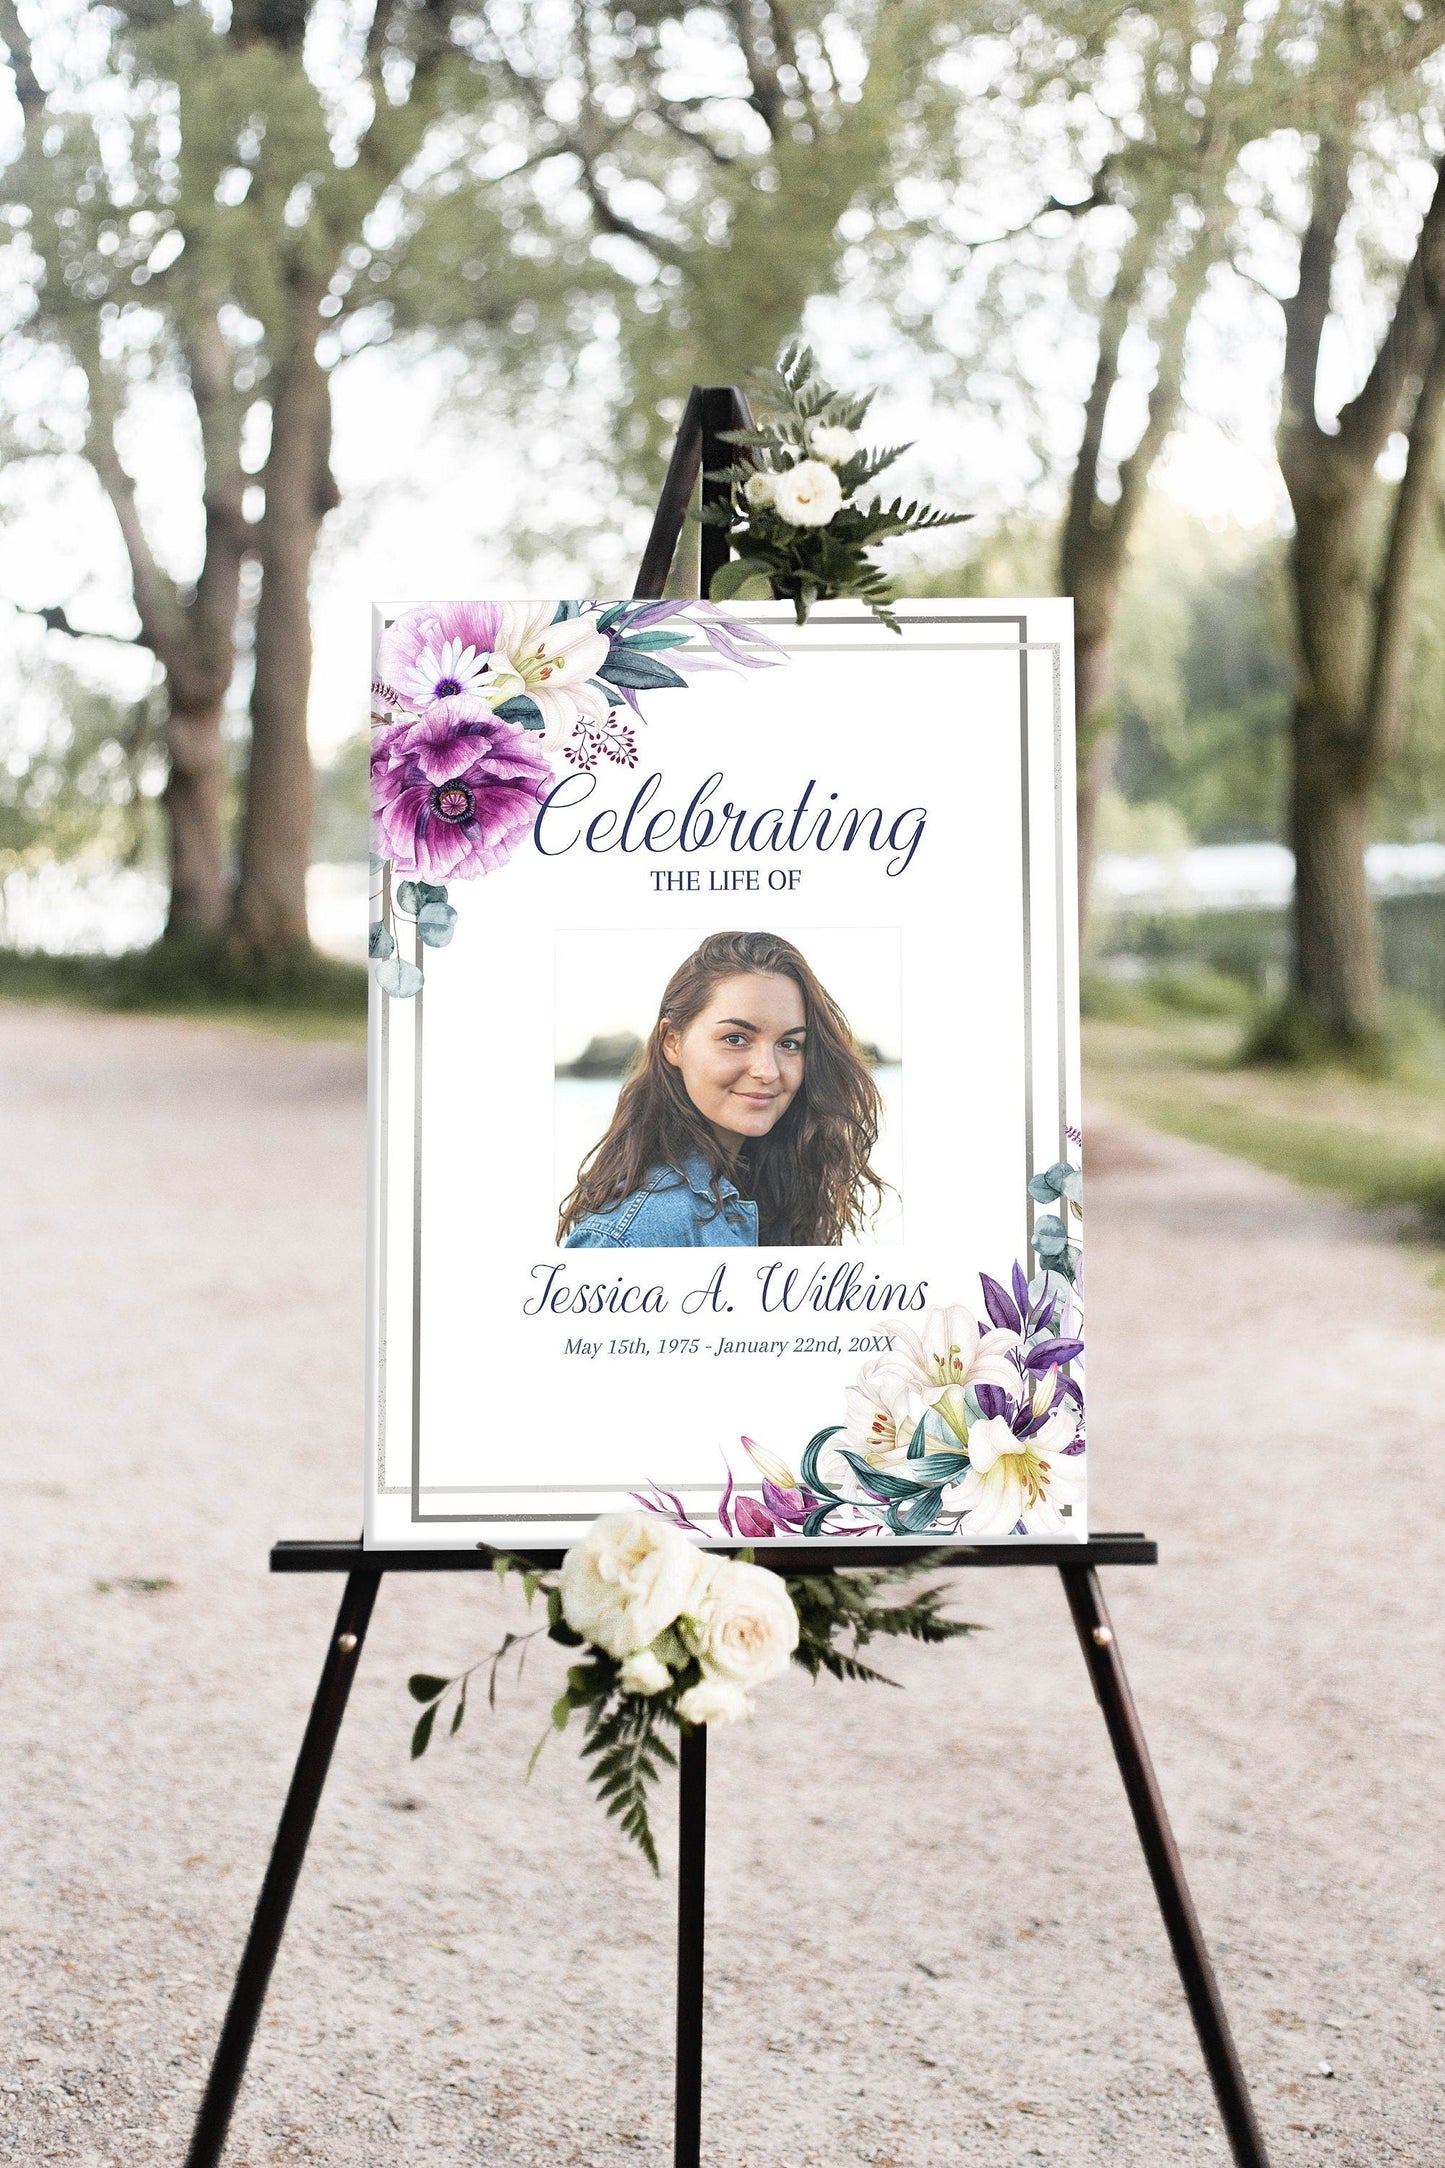 border with flowers for funeral service photo display poster